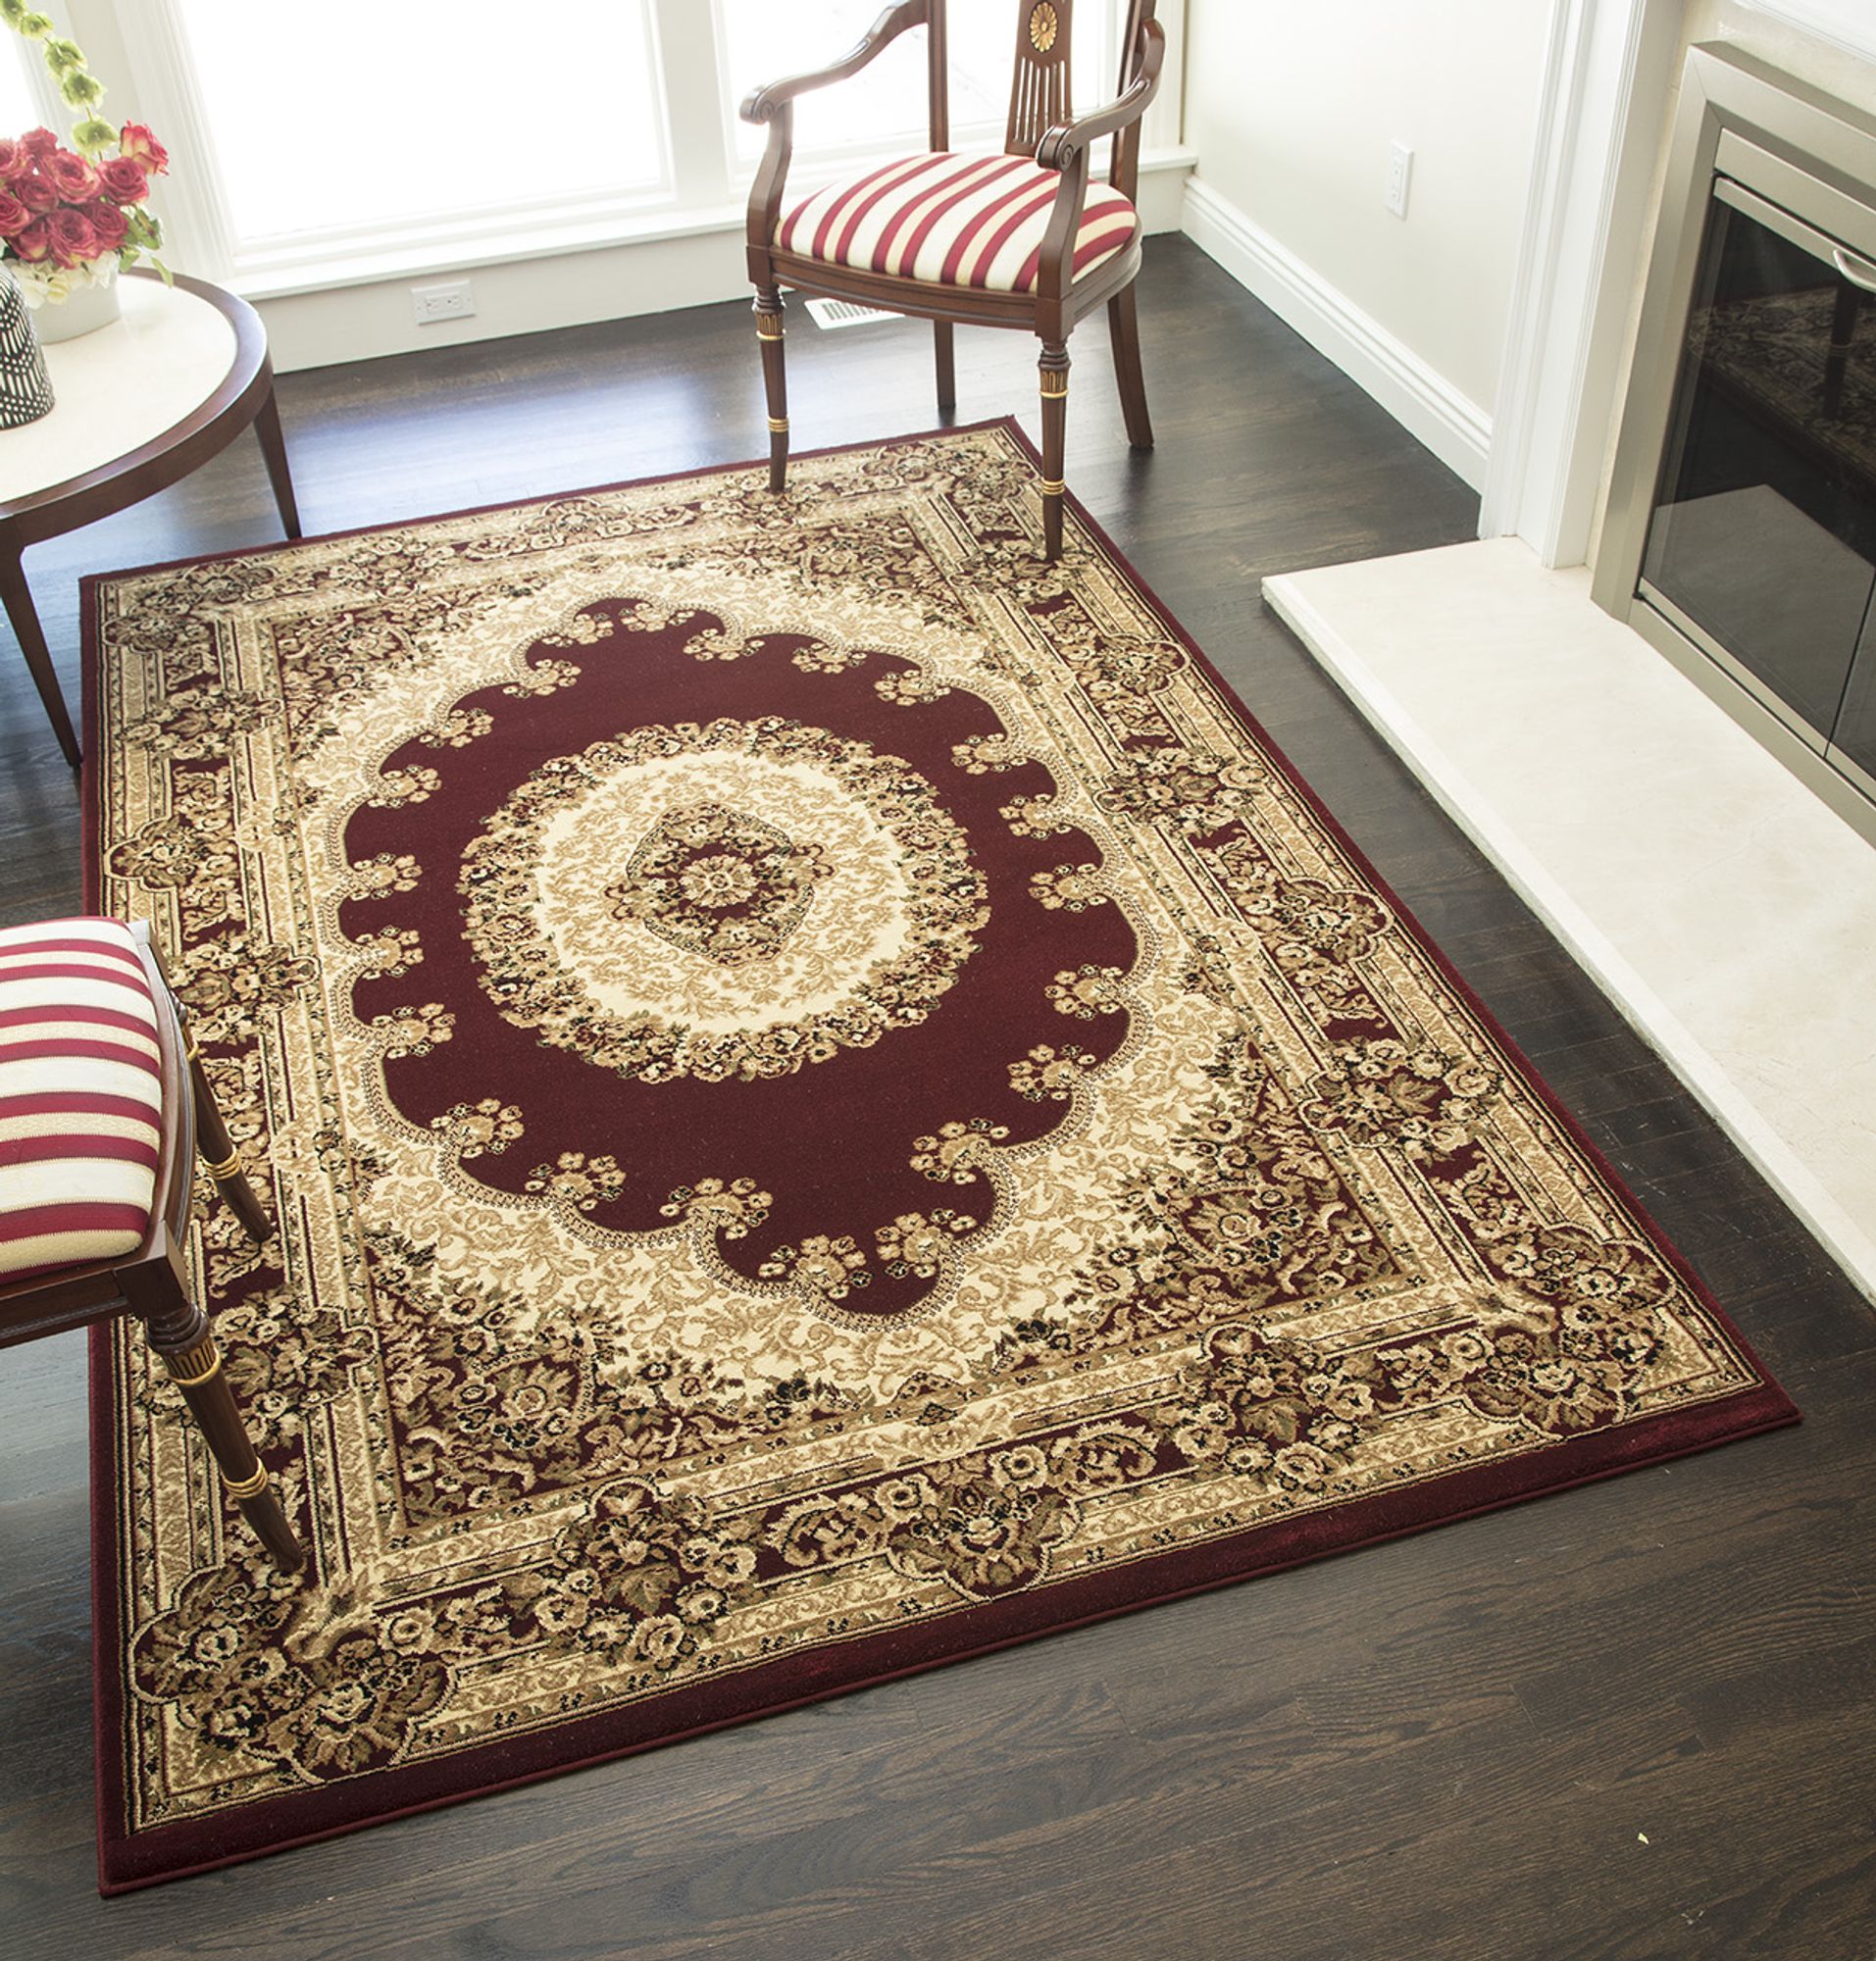 Rugs America Vista 807-RED Kerman Red Oriental Traditional Red Area Rug, 5'3"x7'10" - image 1 of 5